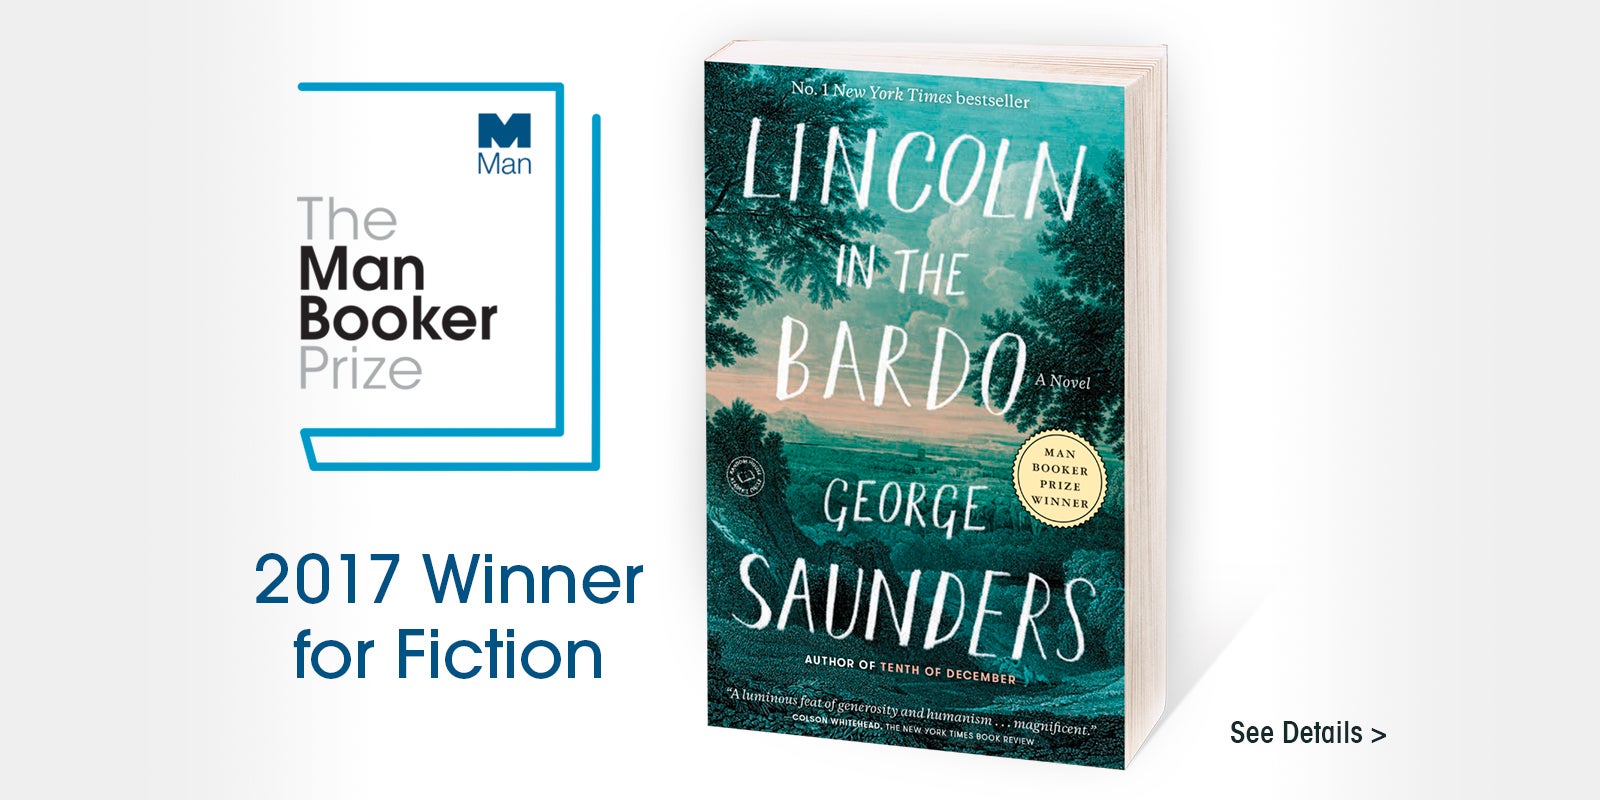 LINCOLN IN THE BARDO by George Saunders wins the 2017 Man Booker Prize